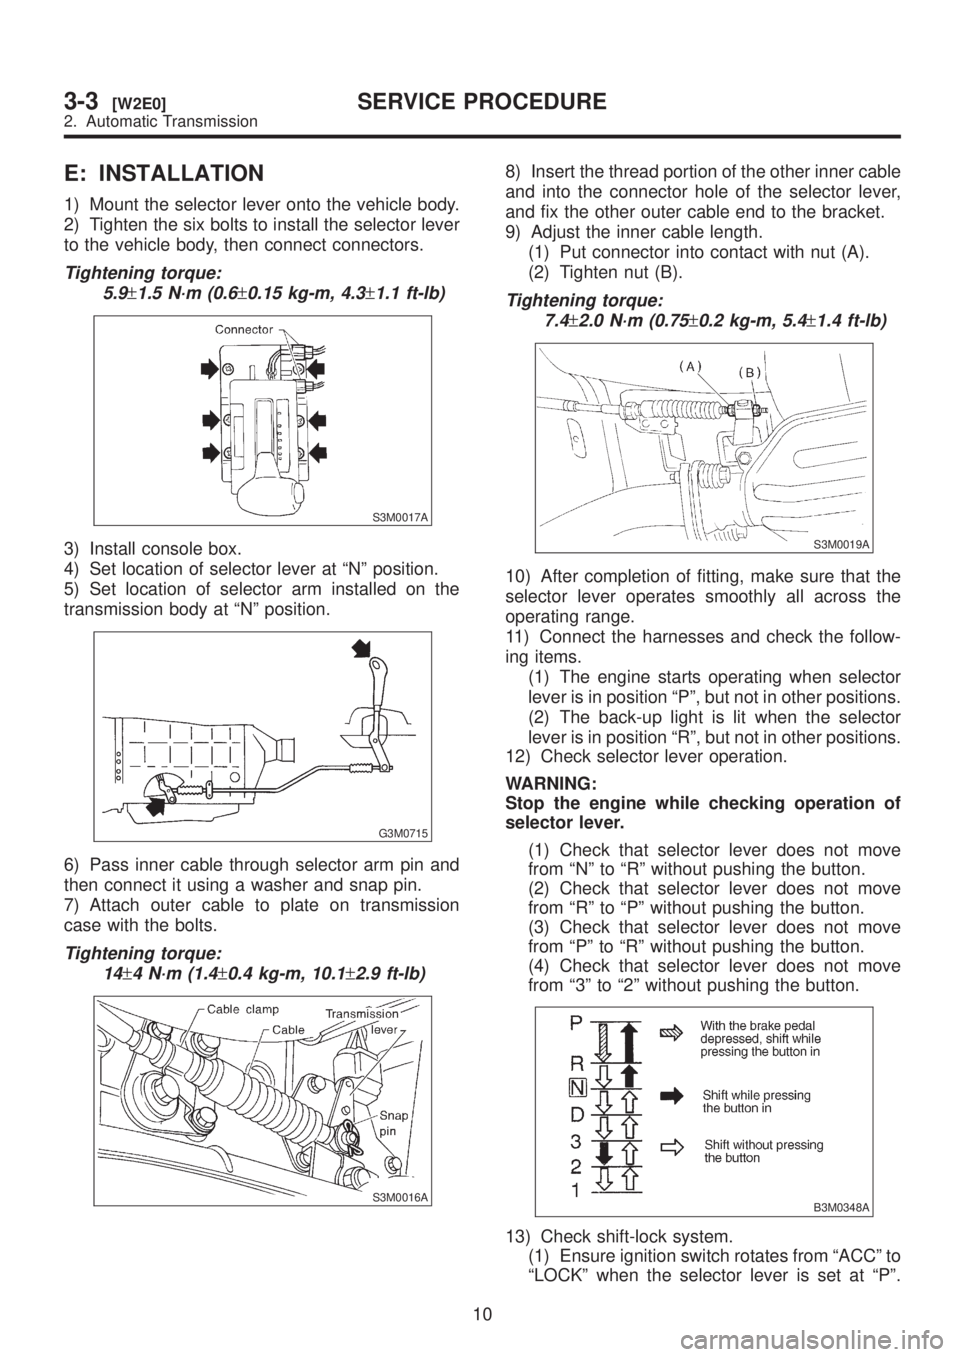 SUBARU LEGACY 1999  Service Repair Manual E: INSTALLATION
1) Mount the selector lever onto the vehicle body.
2) Tighten the six bolts to install the selector lever
to the vehicle body, then connect connectors.
Tightening torque:
5.9
±1.5 N´